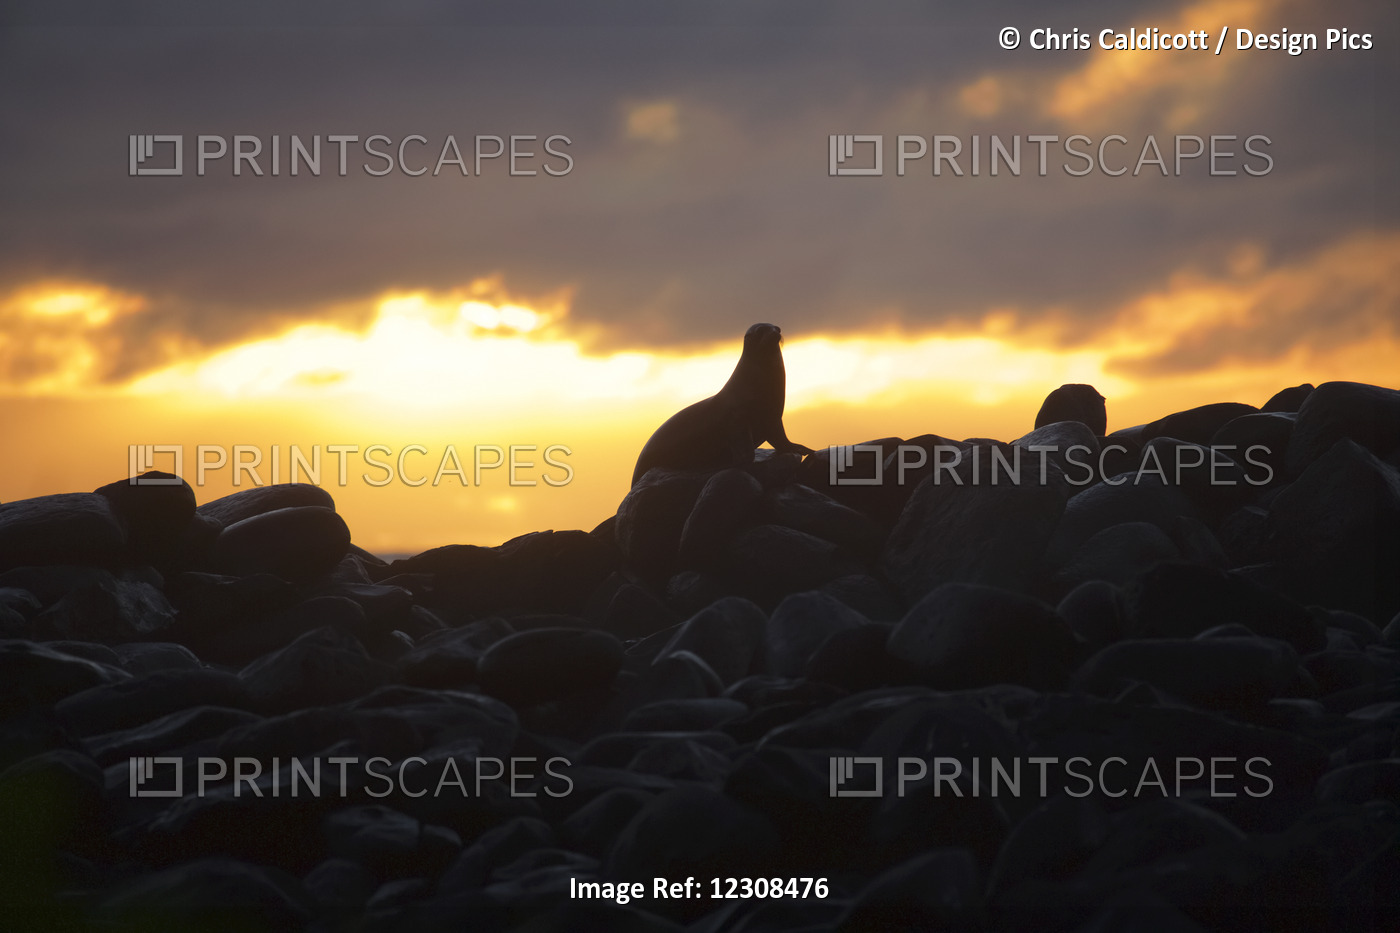 Sea Lion On Rocky Promontory Silhouetted Against A Golden Sunset